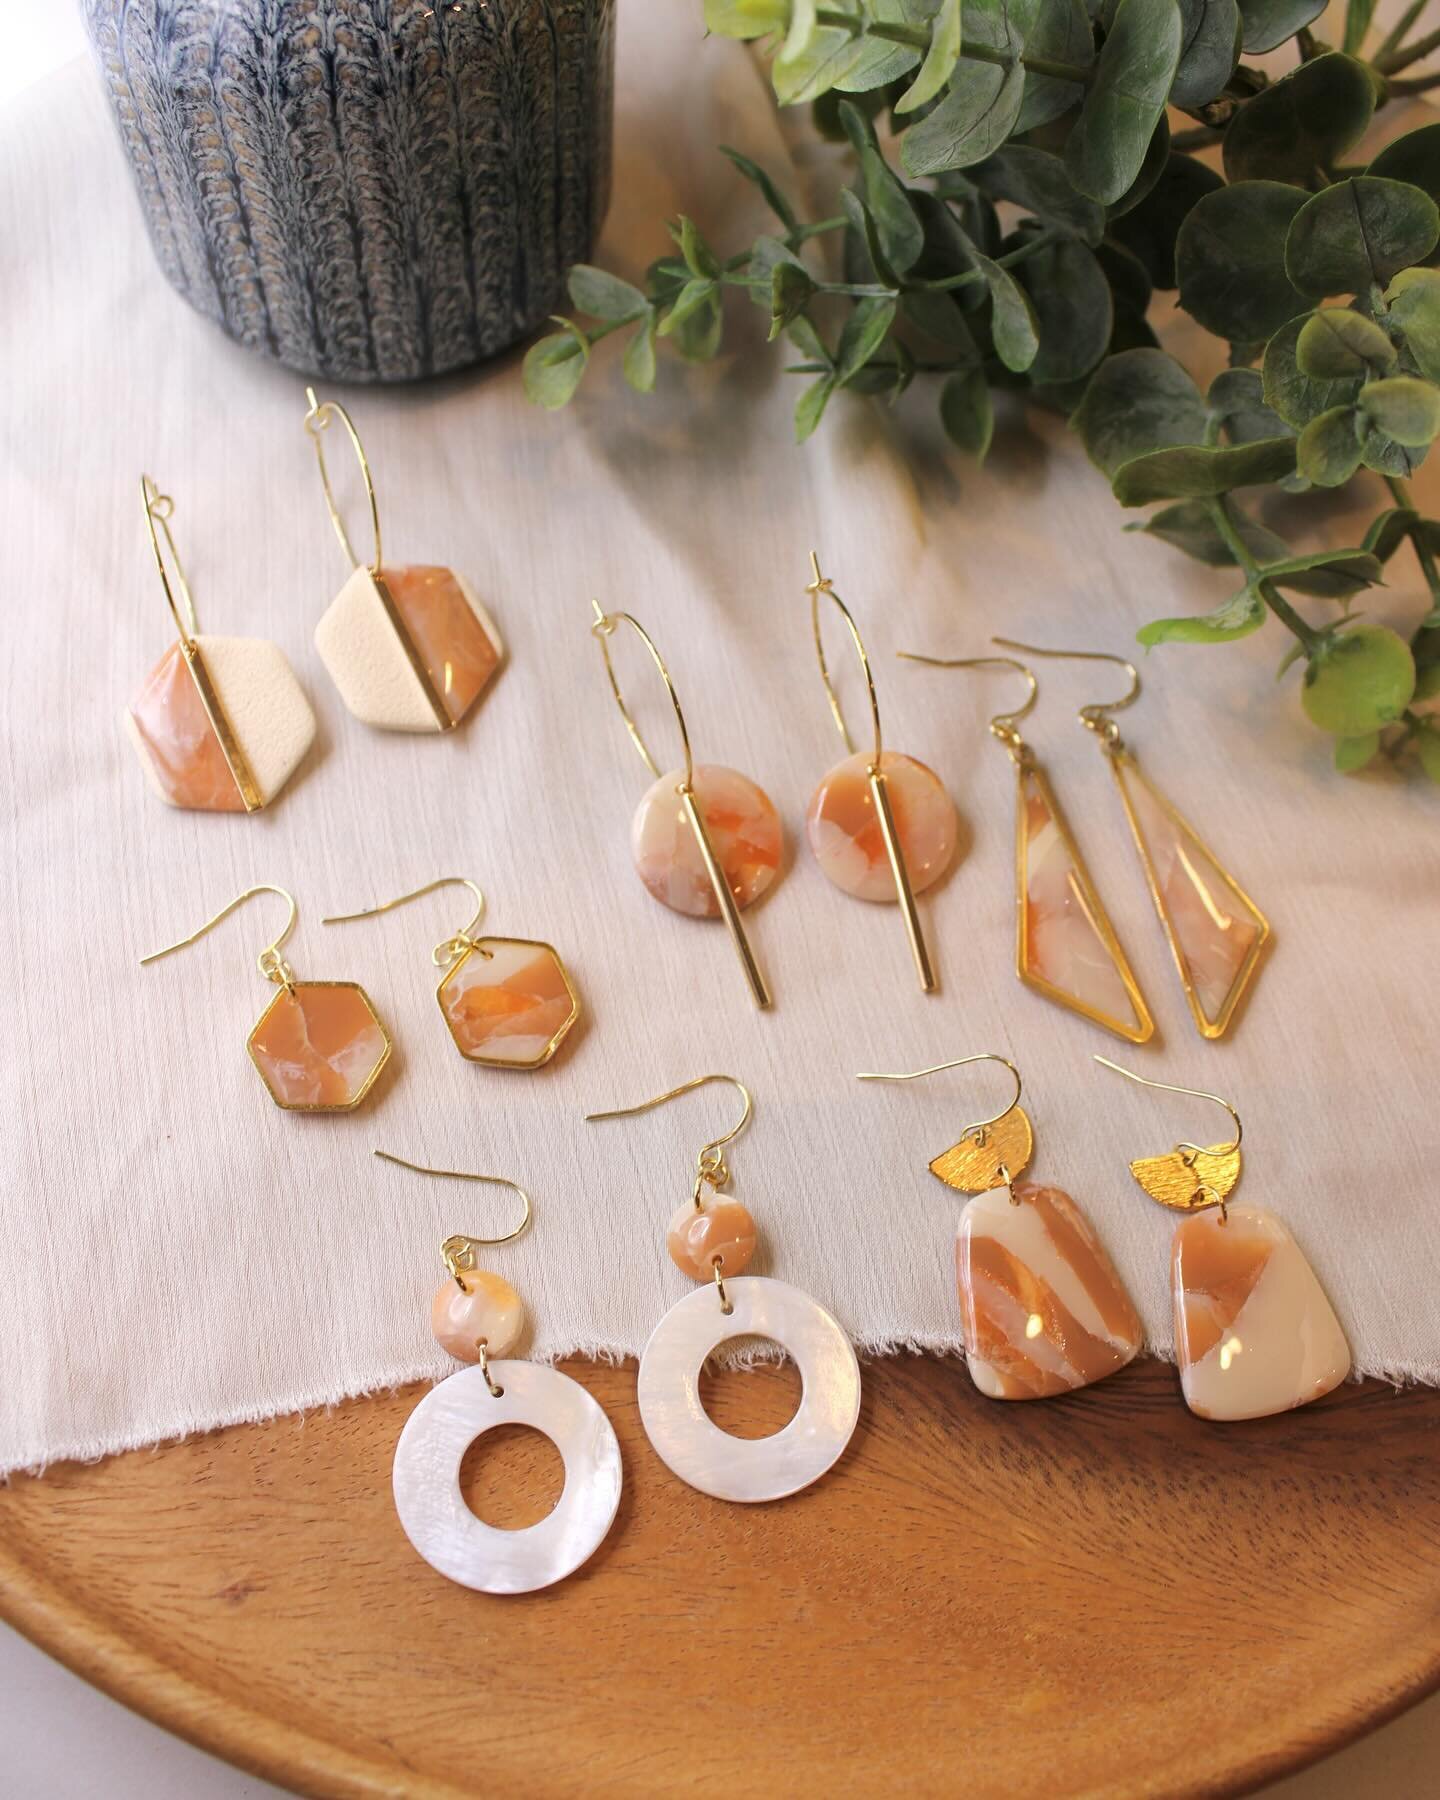 These earrings are making me crave a creamsicle. Is it just me, or can you also taste the stick when you think of one? 

#clayearrings #earringsoftheday #creamsicle #dreamy #earringsofinstagram